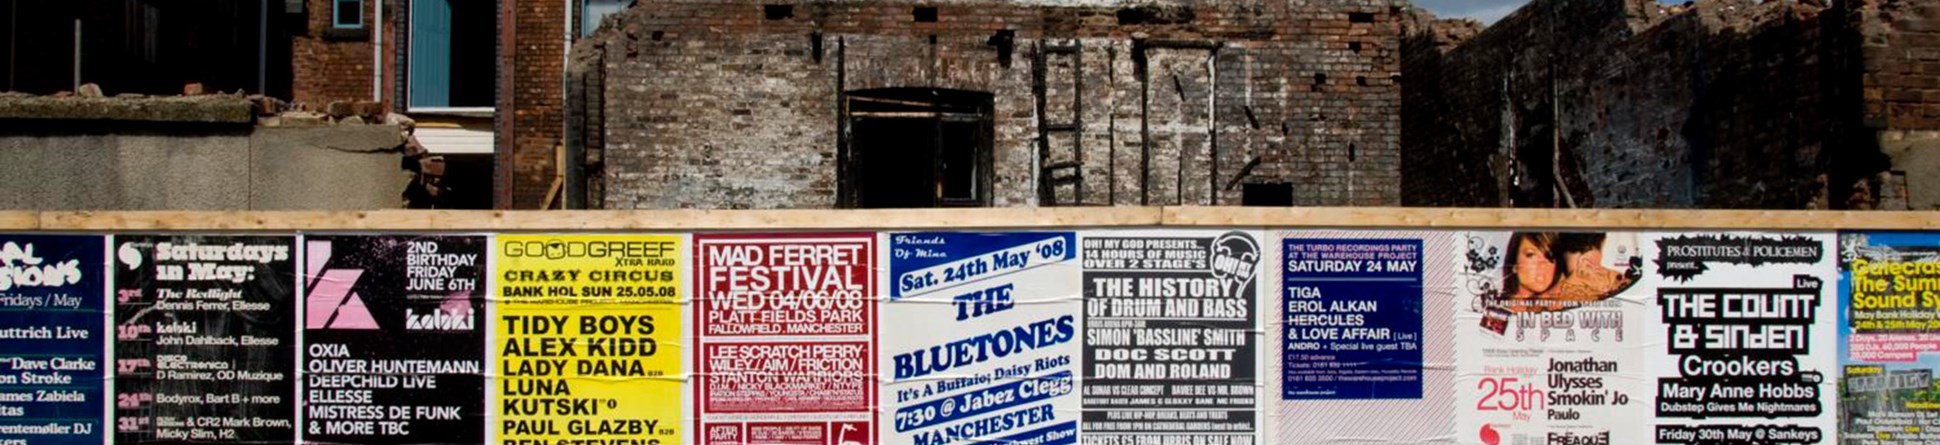 A wooden wall covered in colorful event posters with a partly demolished building and blue sky in the background.